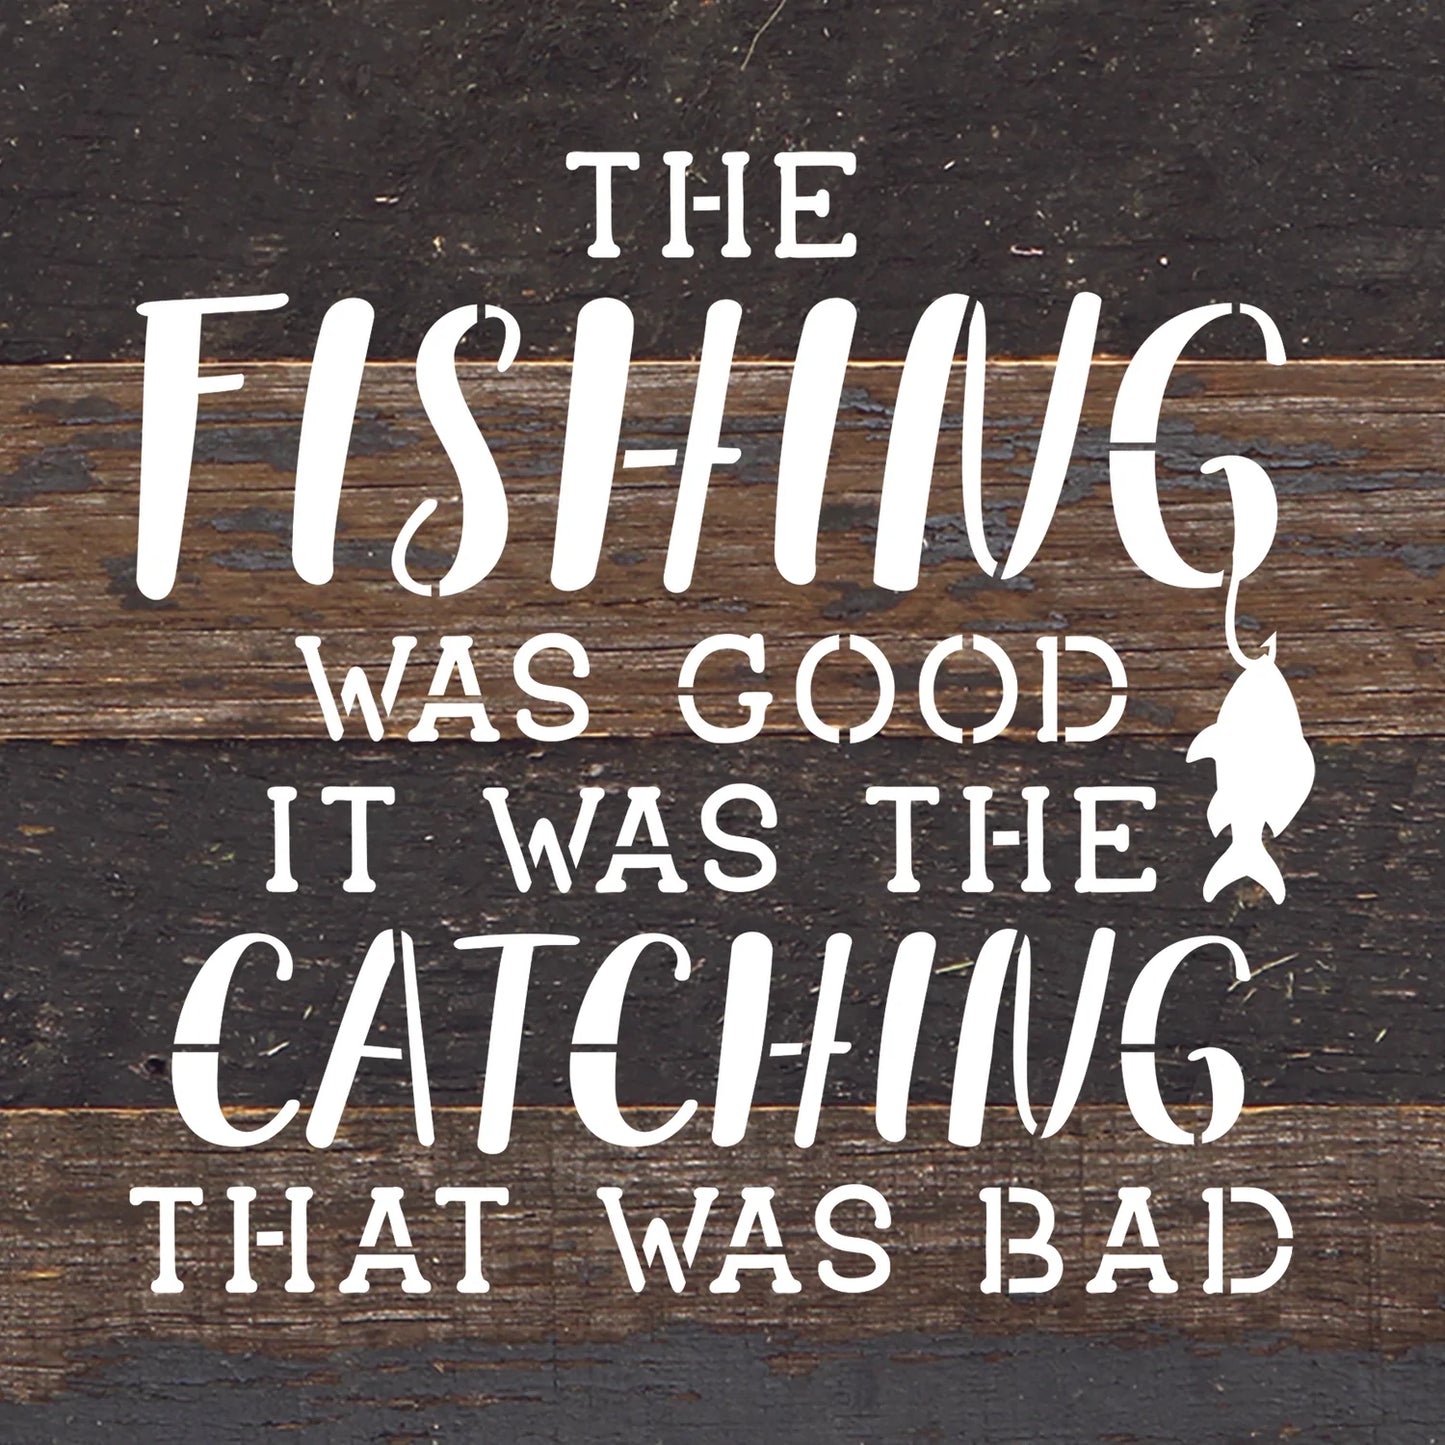 Second Nature by Hand: "The fishing was good" Reclaimed Wood Sign